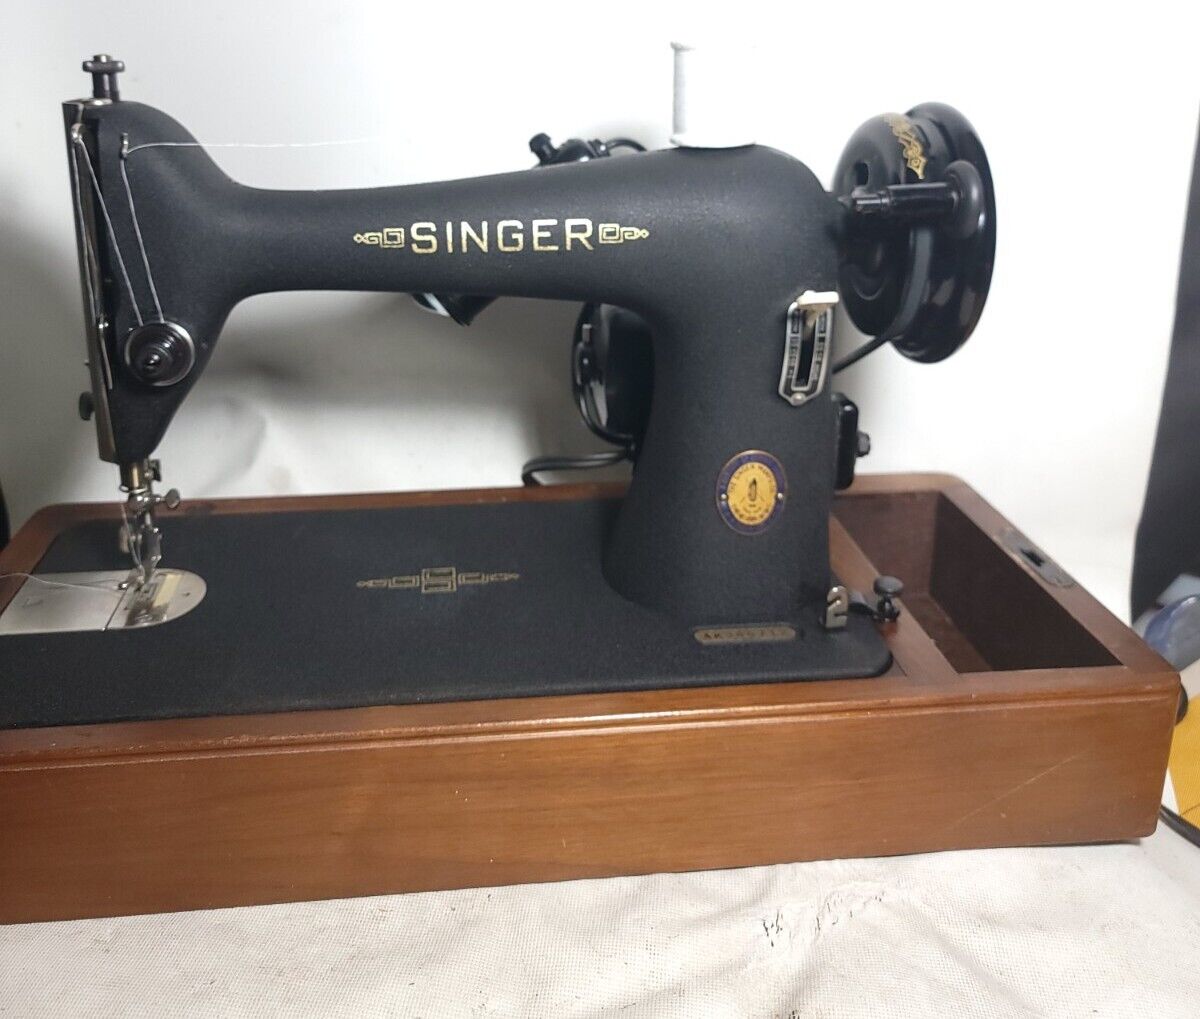 Singer Sewing Machine 1951 66 Black Crinkle Finish- Booklet, Attachments & Pedal